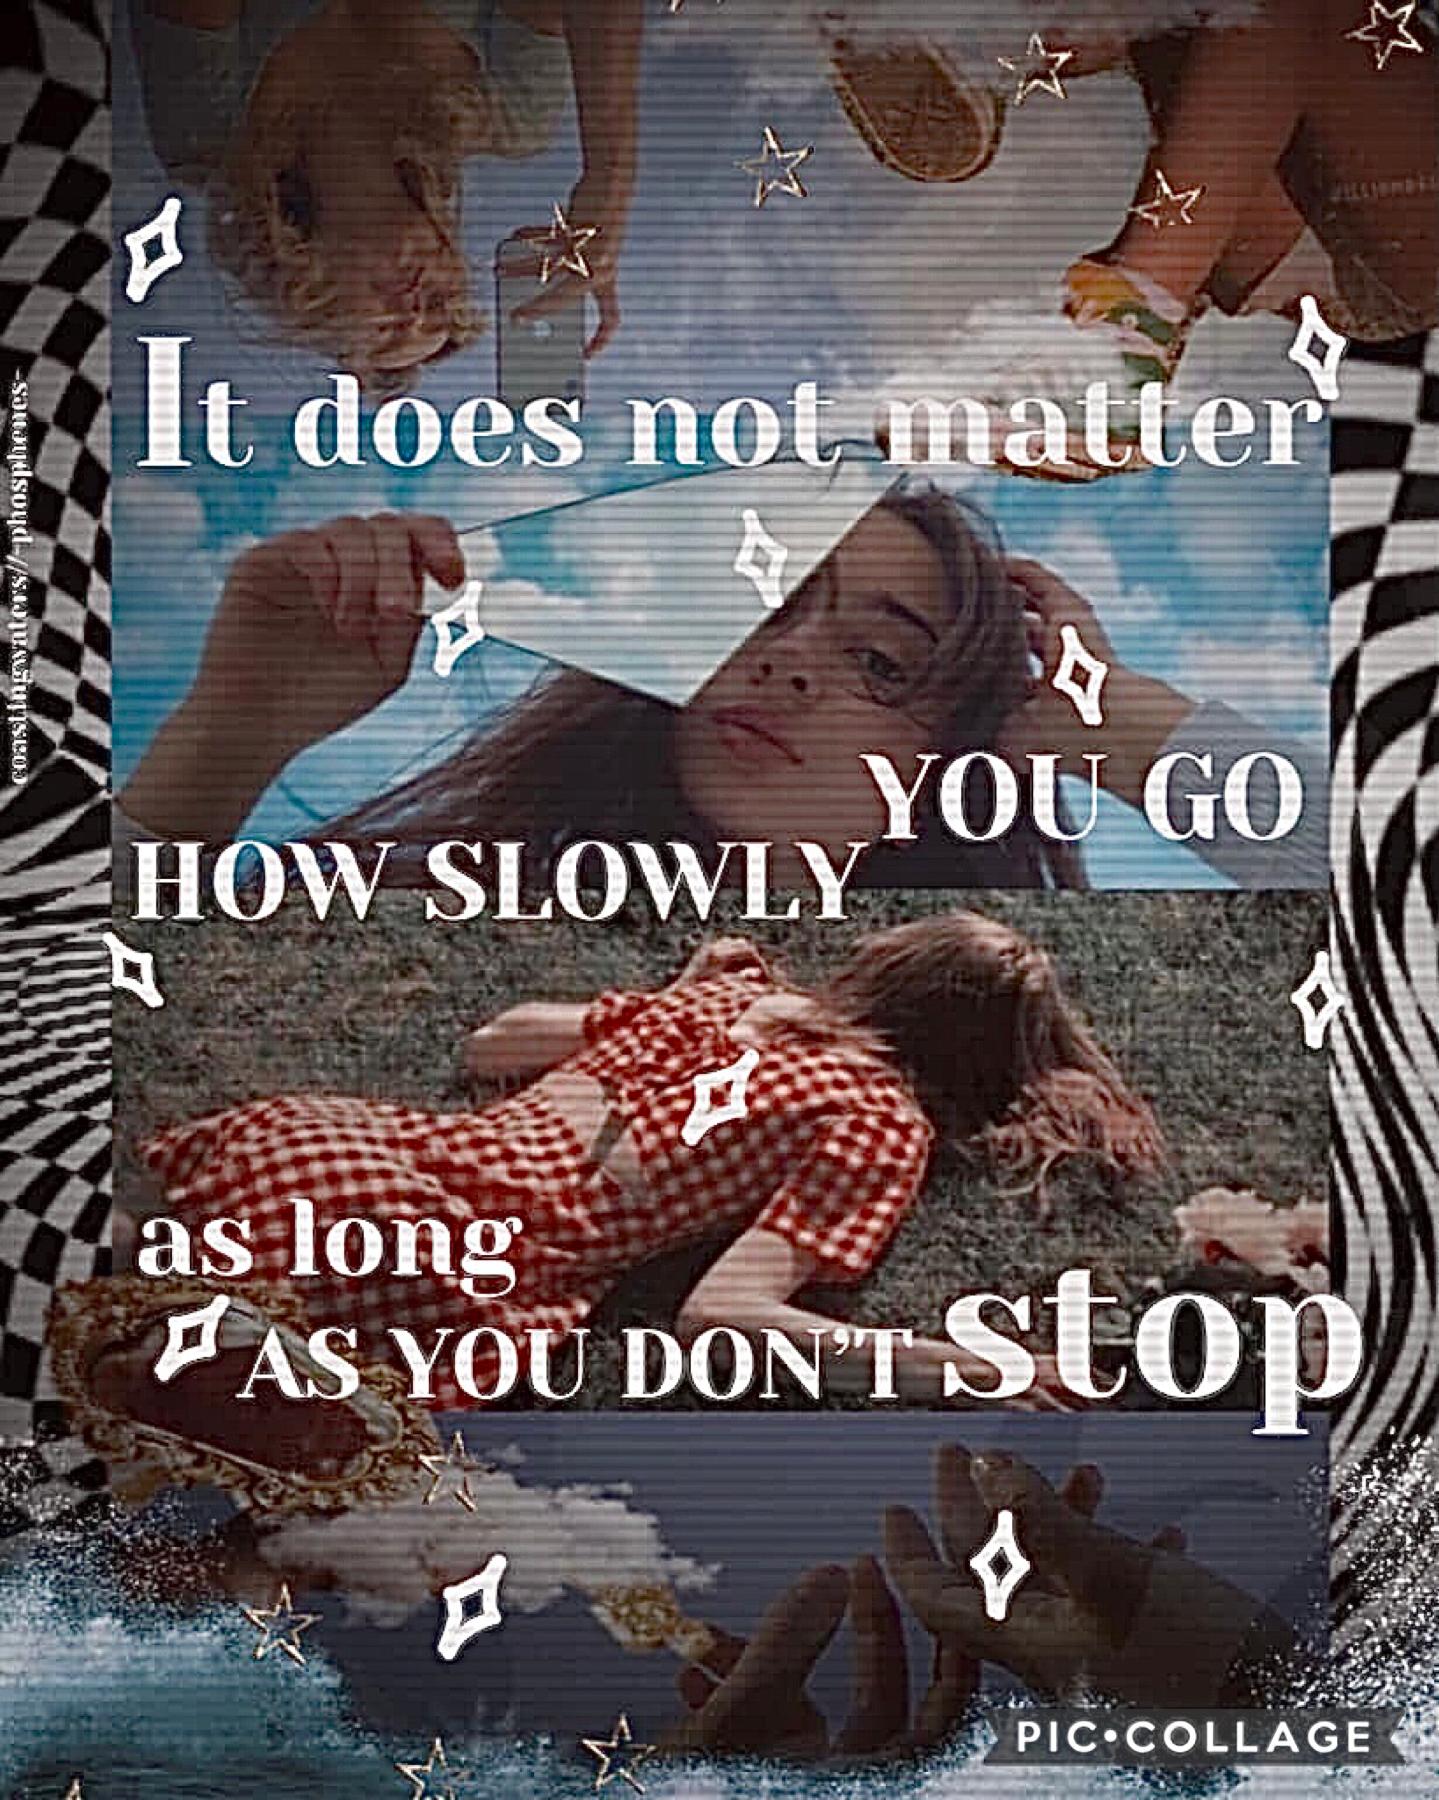 🌊1/12/22🌊
old collab with caite @euph0ria- who did the text !!
thought that i would post this & share some positivity :)
always keep going, ur journey may be different compared to others but don’t stop until you reach the end 💗!!